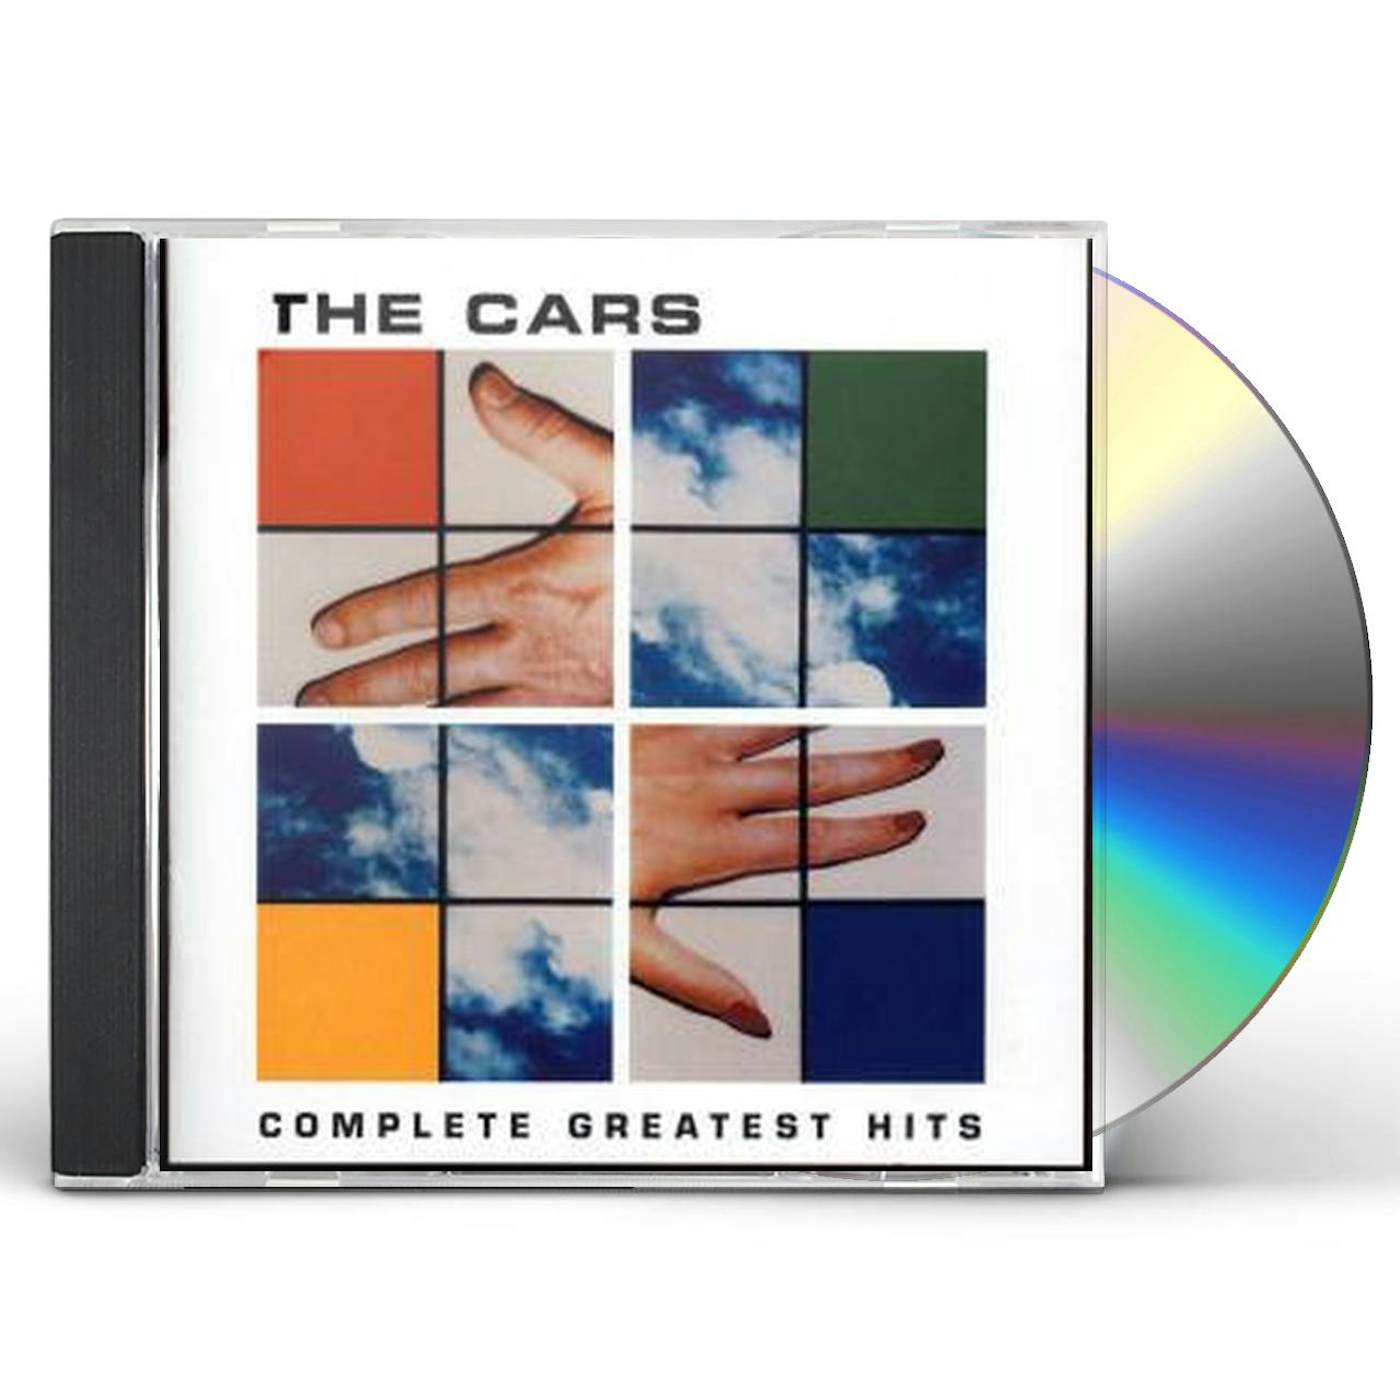 The Cars COMPLETE GREATEST HITS CD